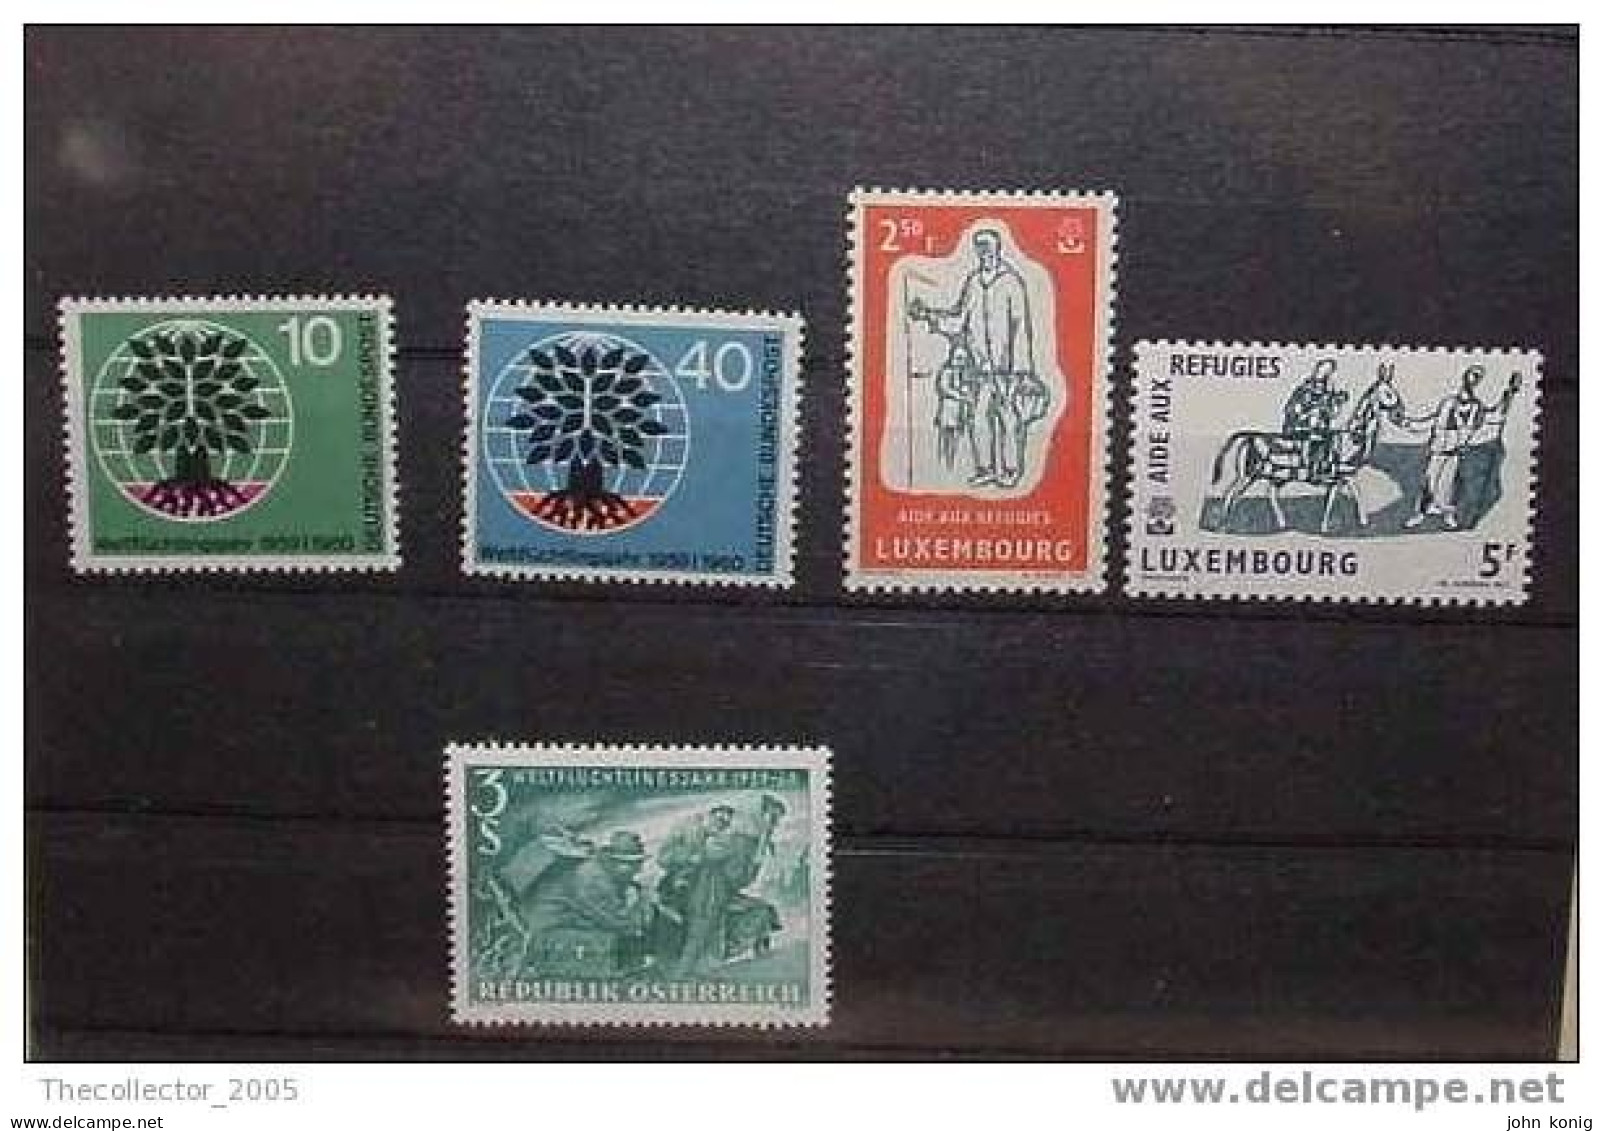 ANNO DEL RIFUGIATO-REFUGEE YEAR- SET OF 5 - GERMANY-LUXEMBOURG-AUSTRIA - Refugees